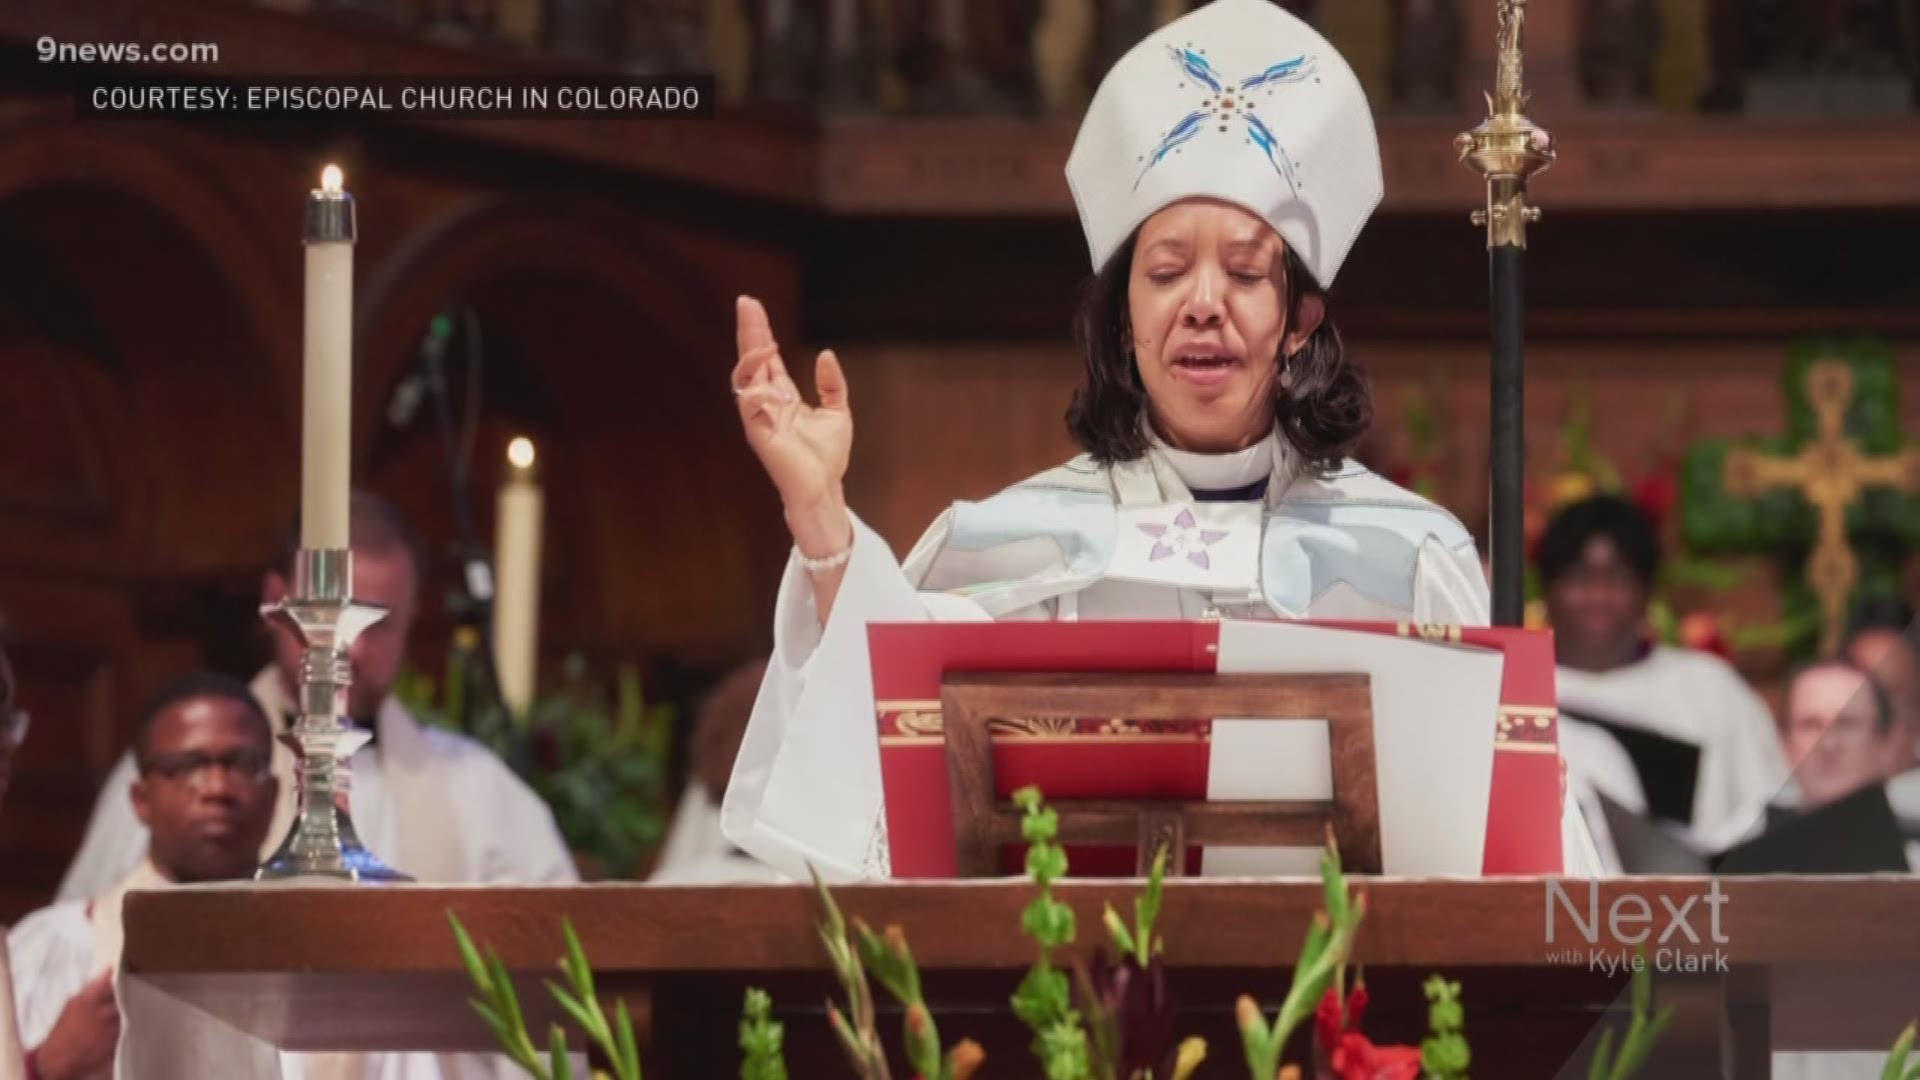 9NEWS spoke with the first female and first African American bishop of the Episcopal Church of Colorado.